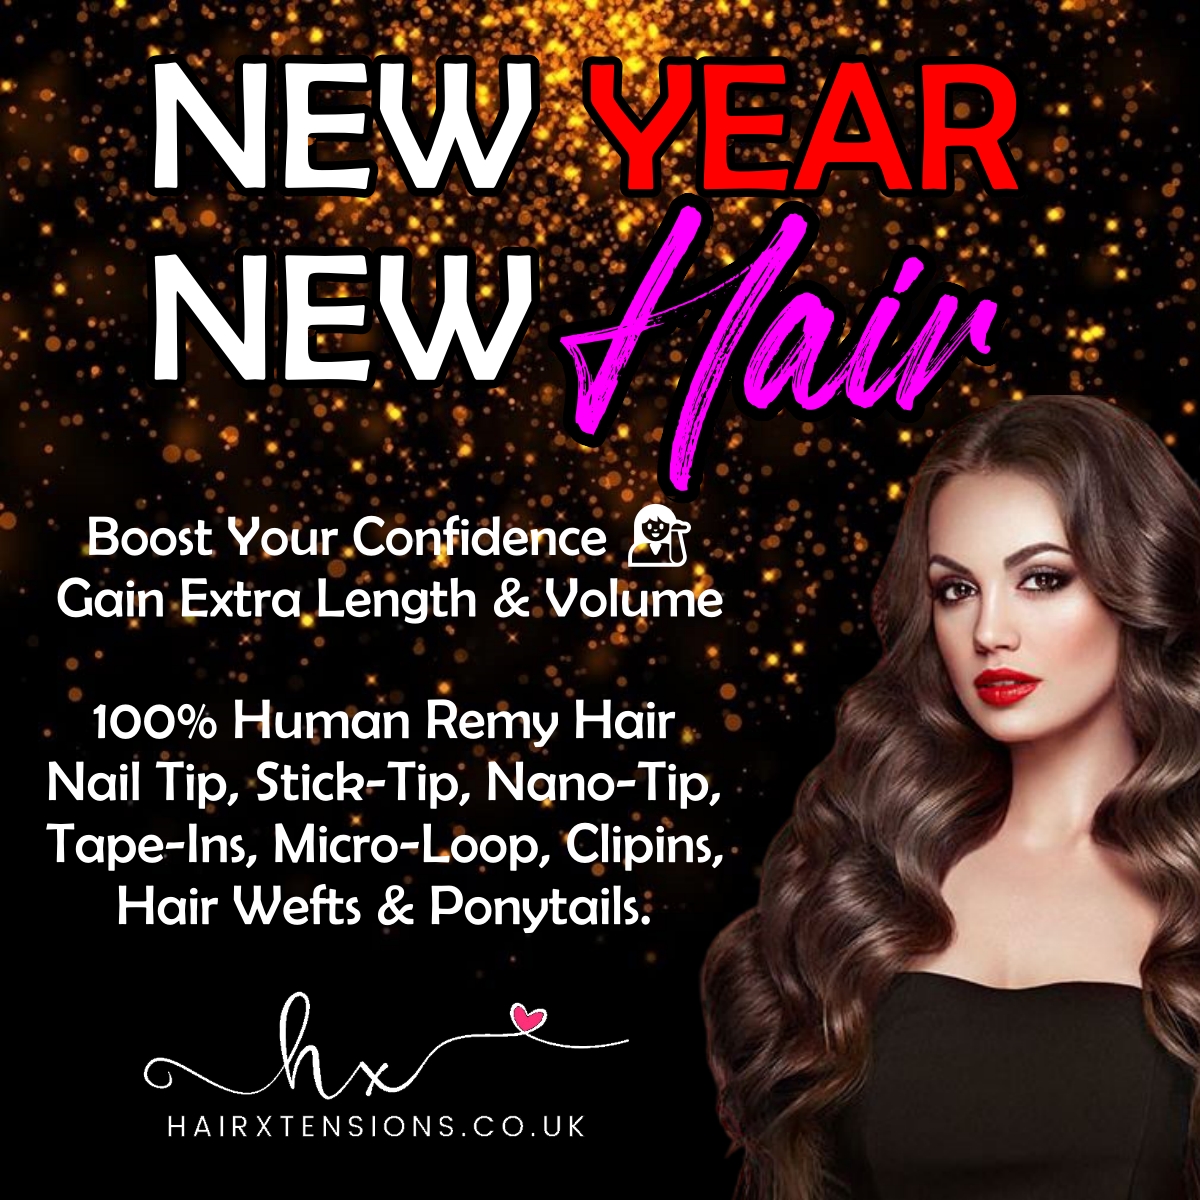 🅽🅴🆆 🆈🅴🅰🆁, 🅽🅴🆆 🅷🅰🅸🆁 💁‍♀️
 
Shop The Range 🛍️ HairXtensions.co.uk
 
#prebondedhairextensions #prebondedhair #humanhairextensions #remyhairextensions #remyhair #hairweaves #hairwefts #nanohair #nanohairextensions #clipins #clipinhairextensions #tapeins